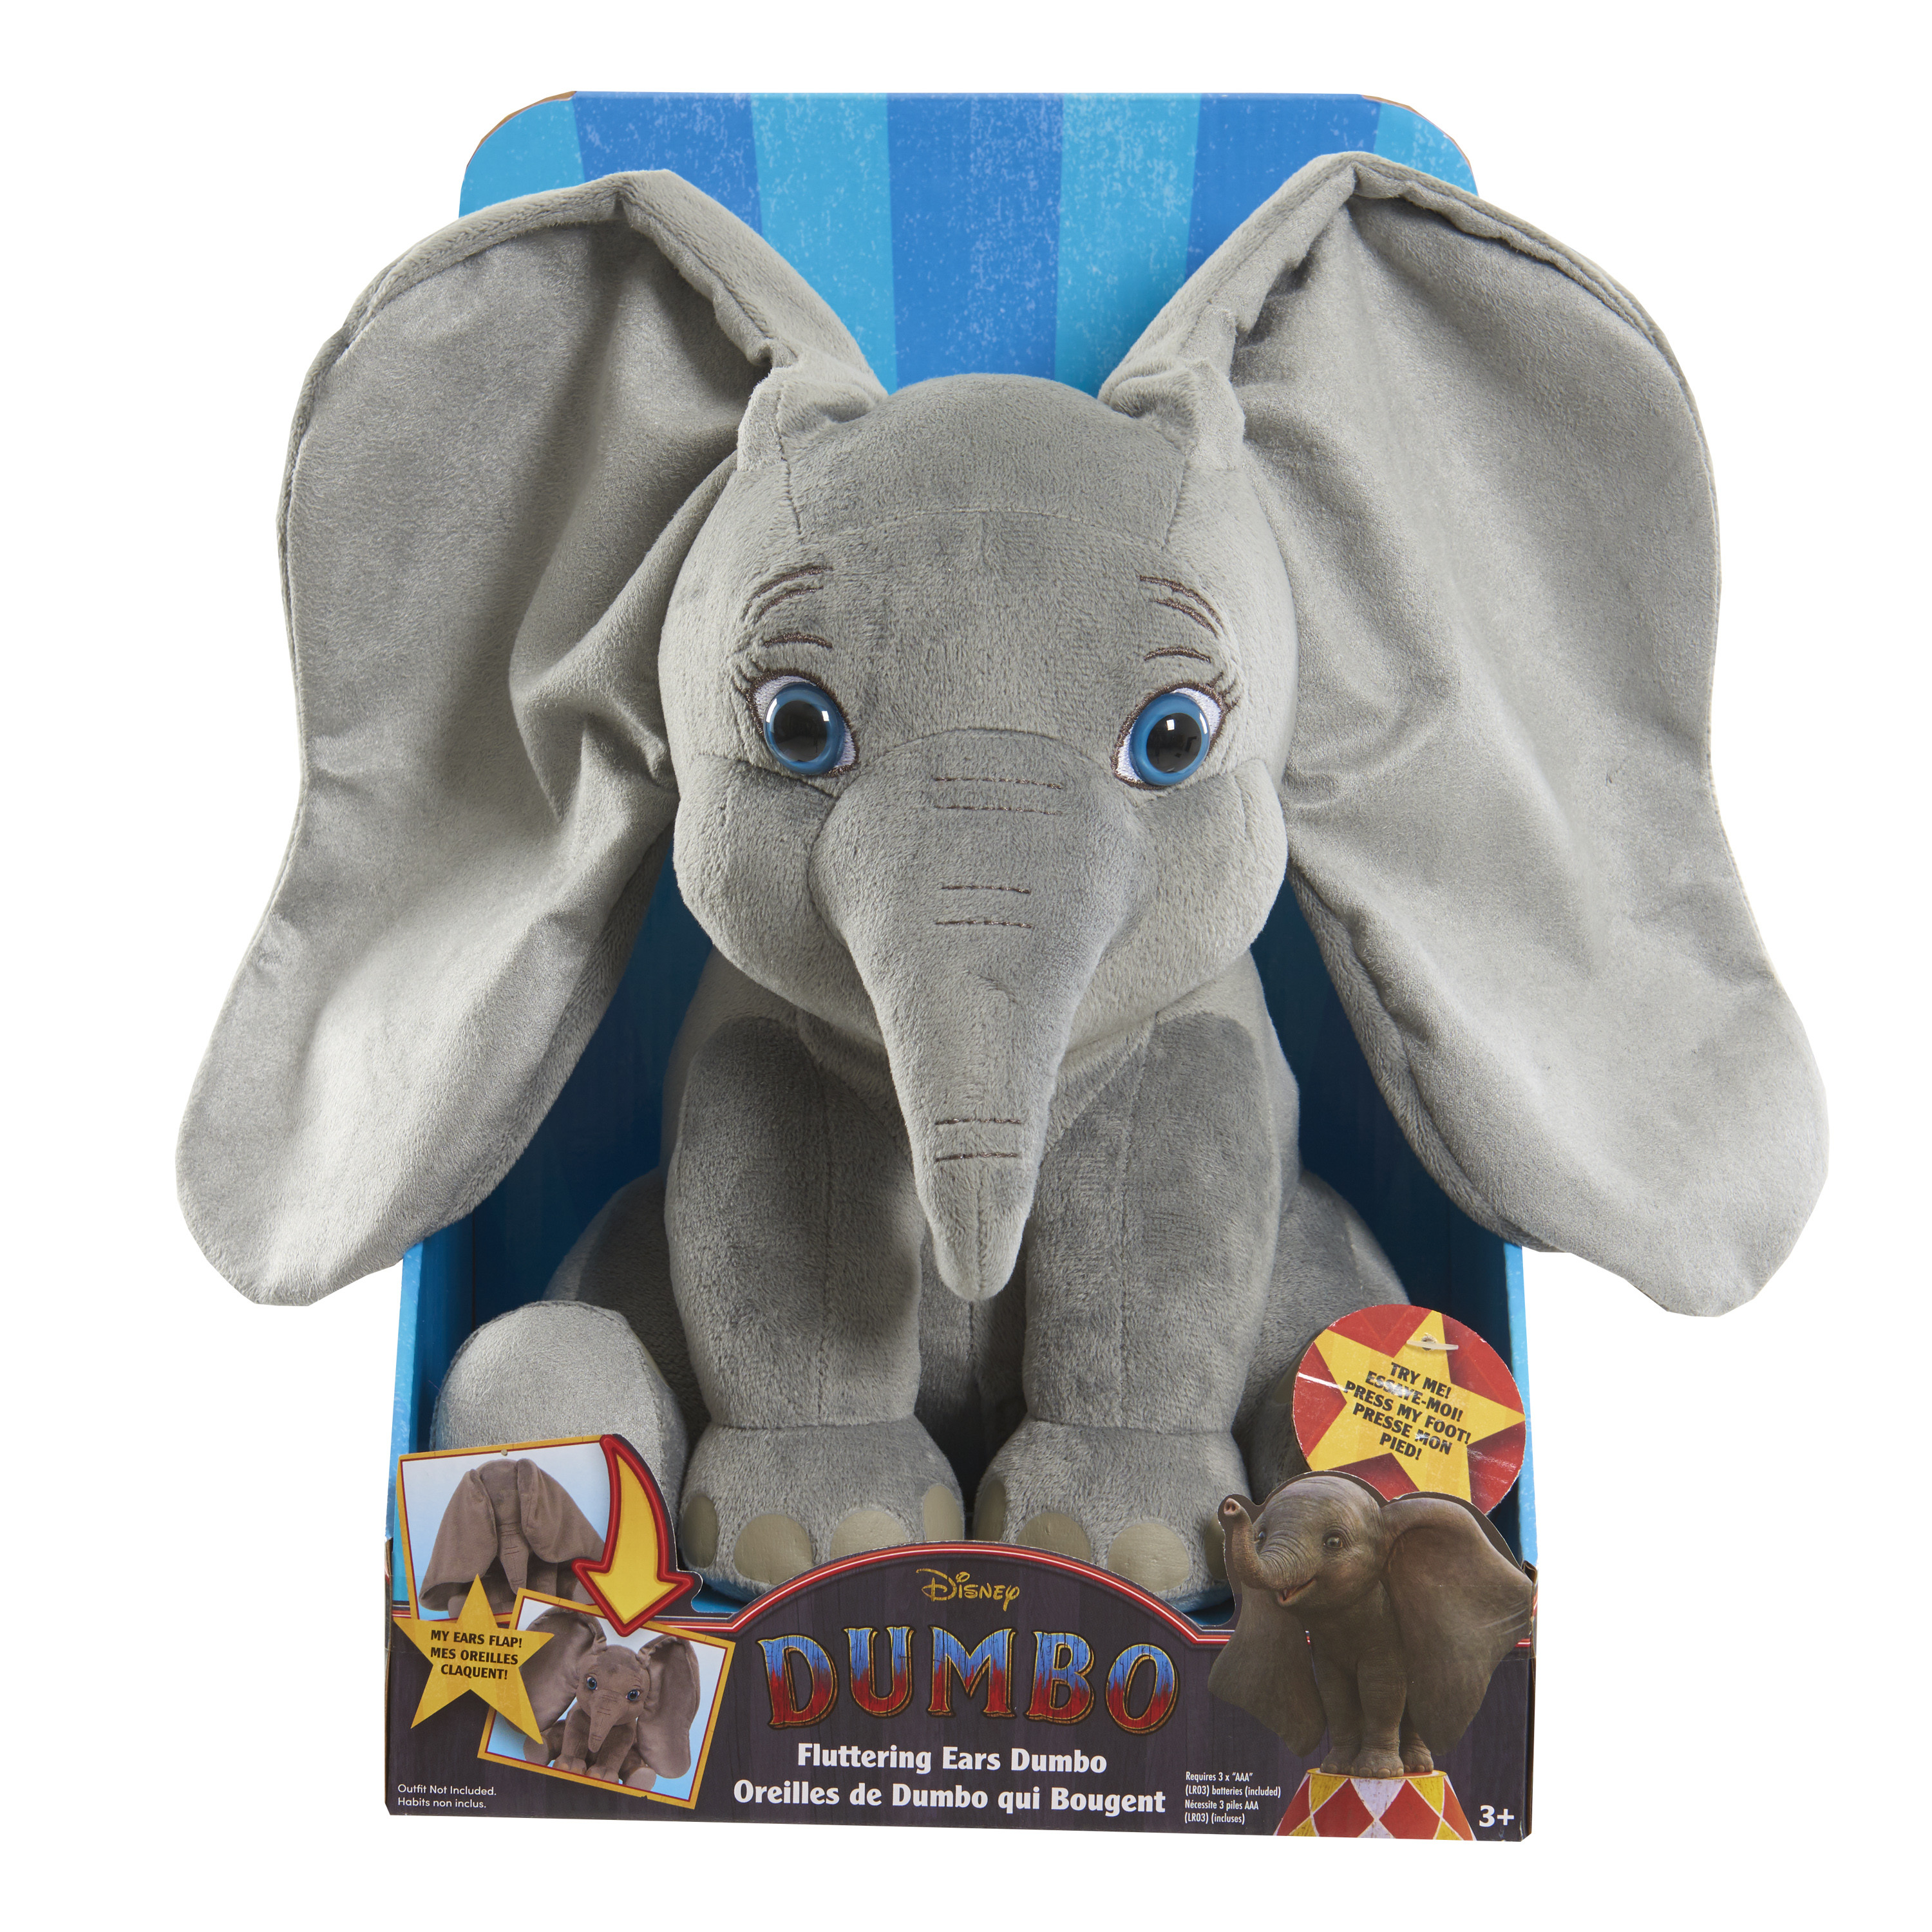 Disney's Dumbo Fluttering Ears, Dumbo, Officially Licensed Kids Toys for Ages 3 Up, Gifts and Presents - image 4 of 4